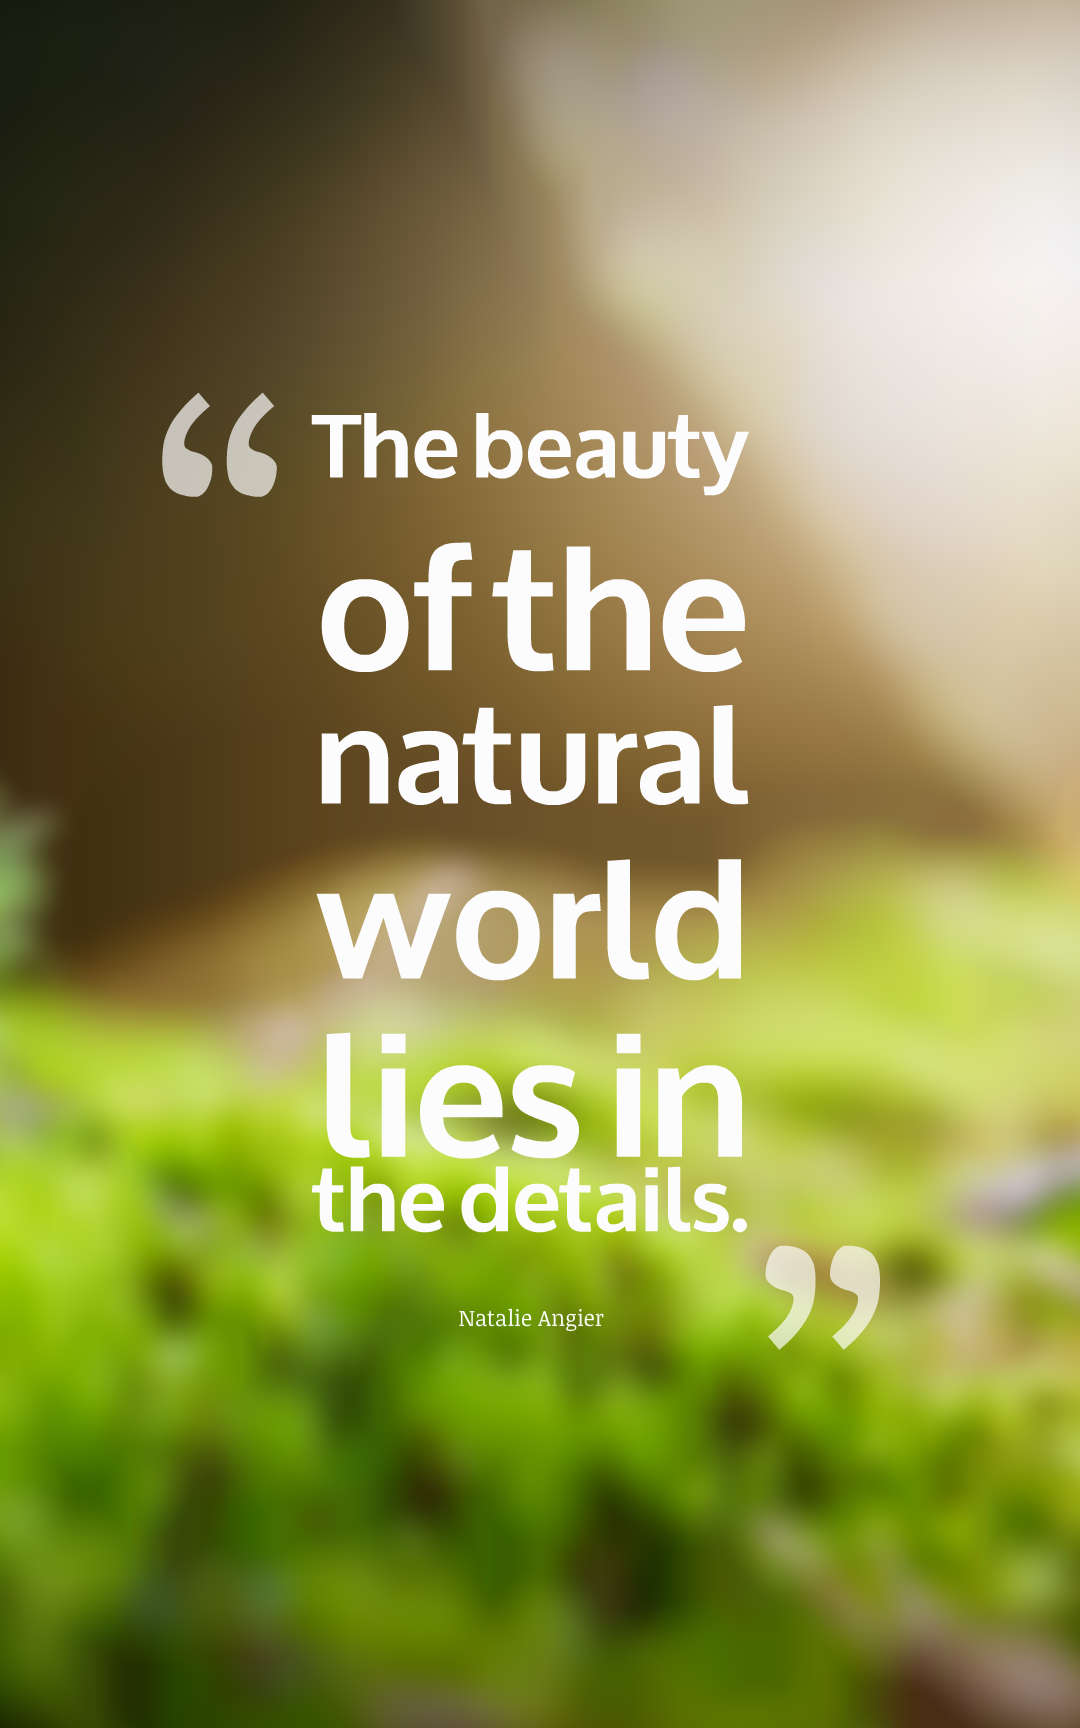 The beauty of the natural world lies in the details.